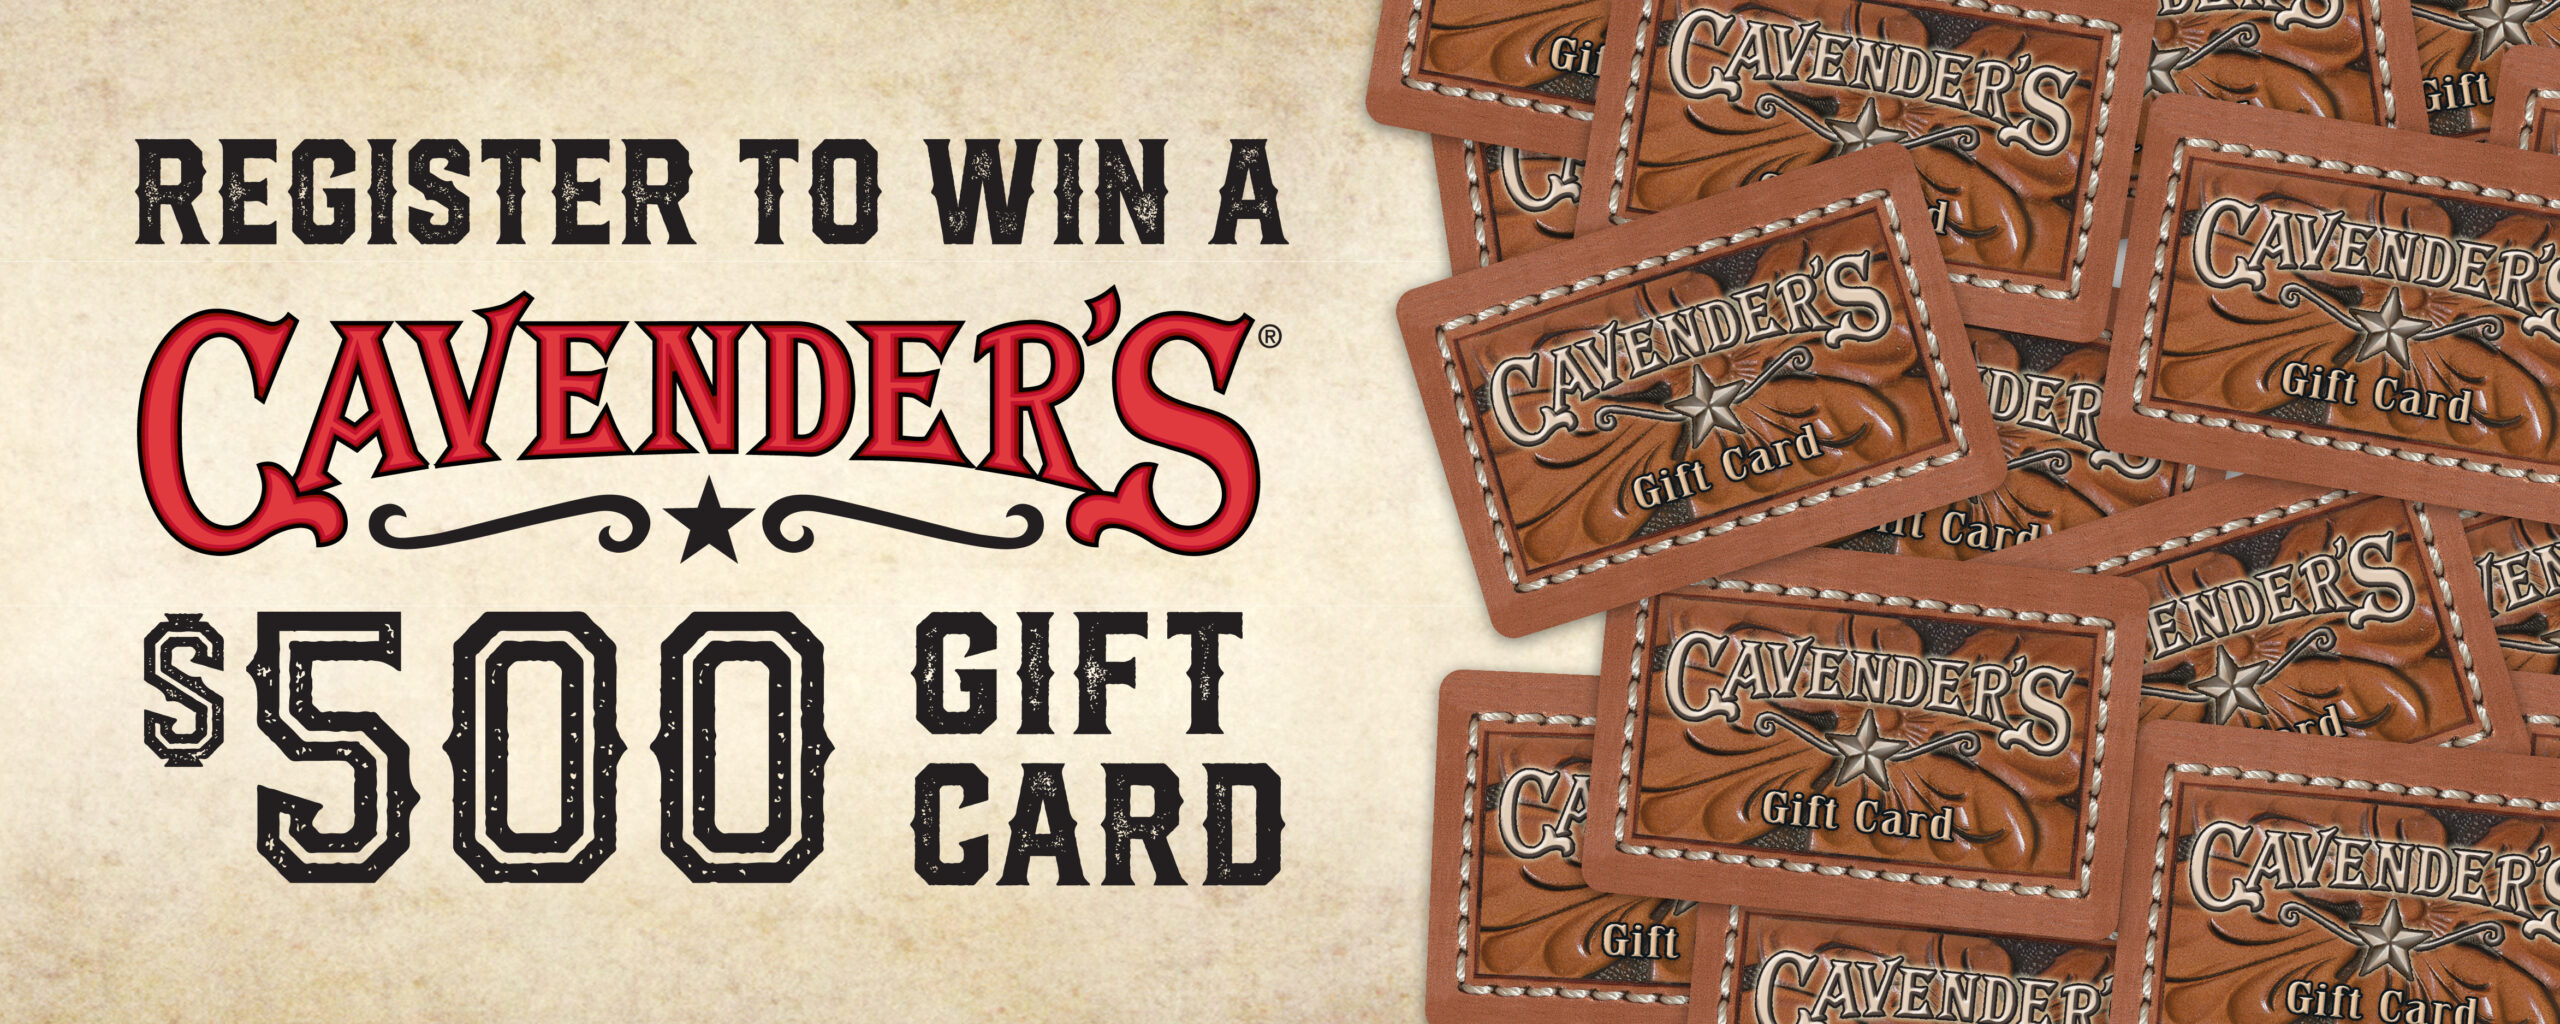 Billy Bobs Gift Card Giveaway